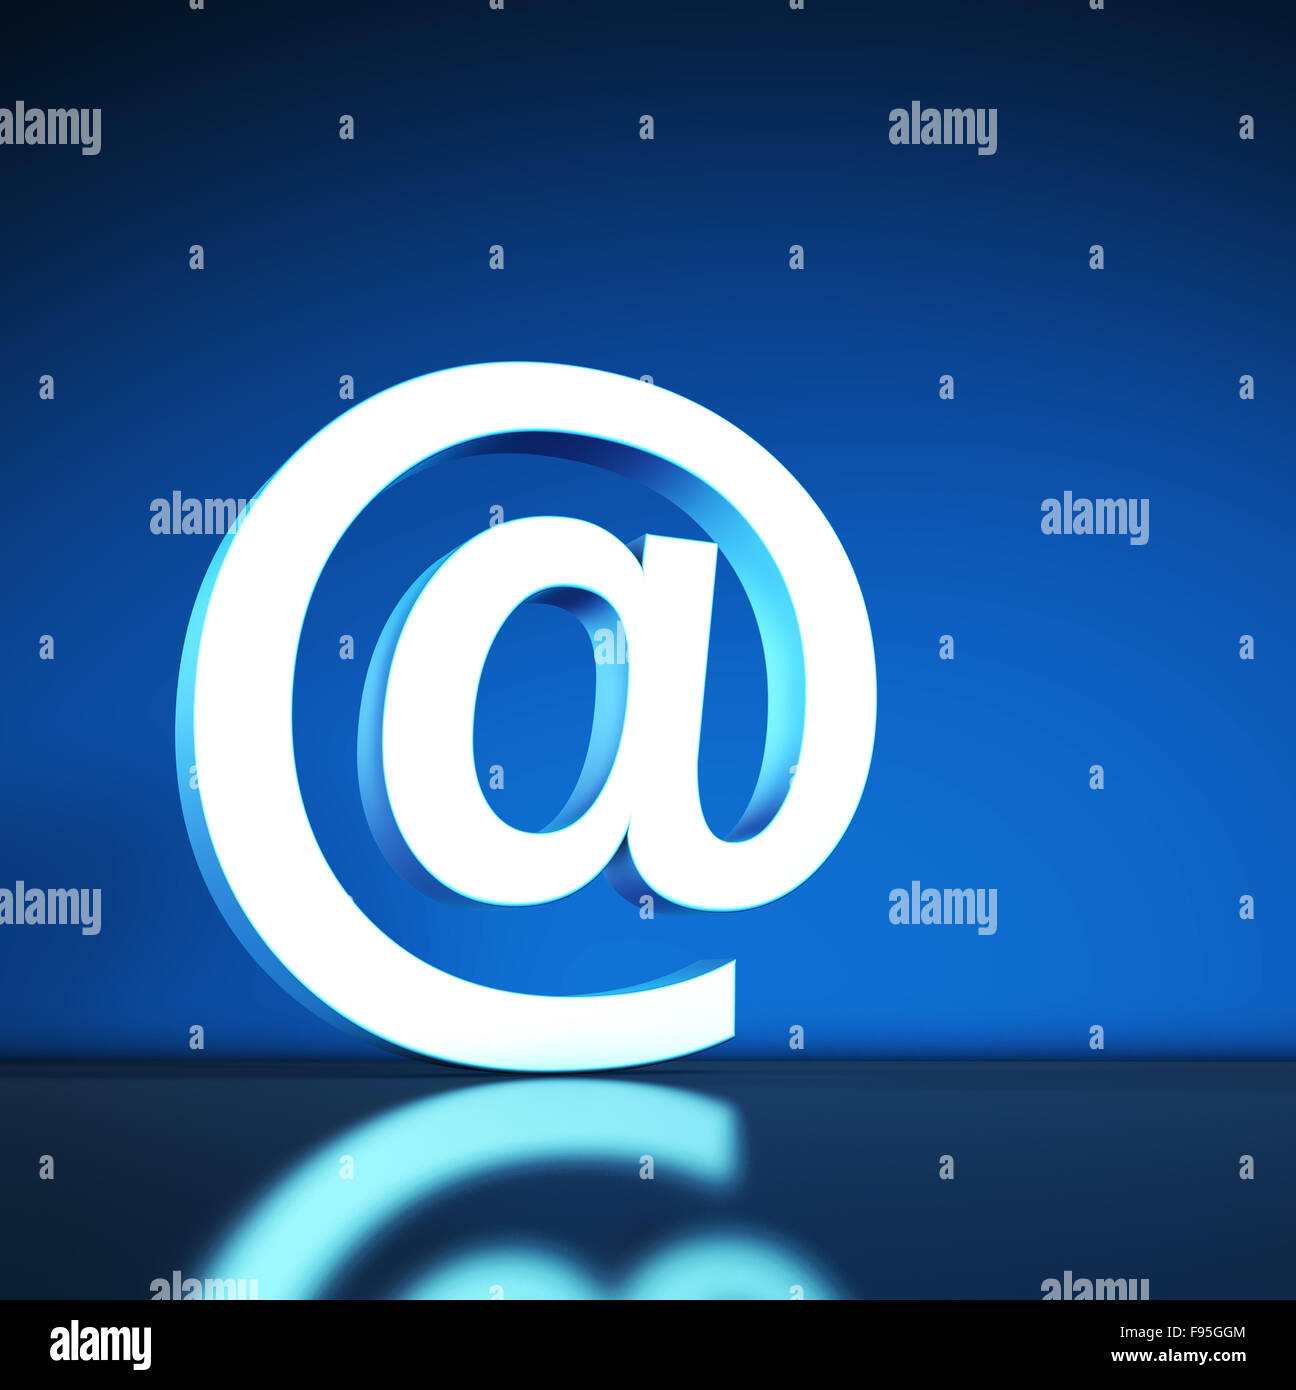 Internet, web connection and e-mail concept with at symbol and icon on blue background. Stock Photo